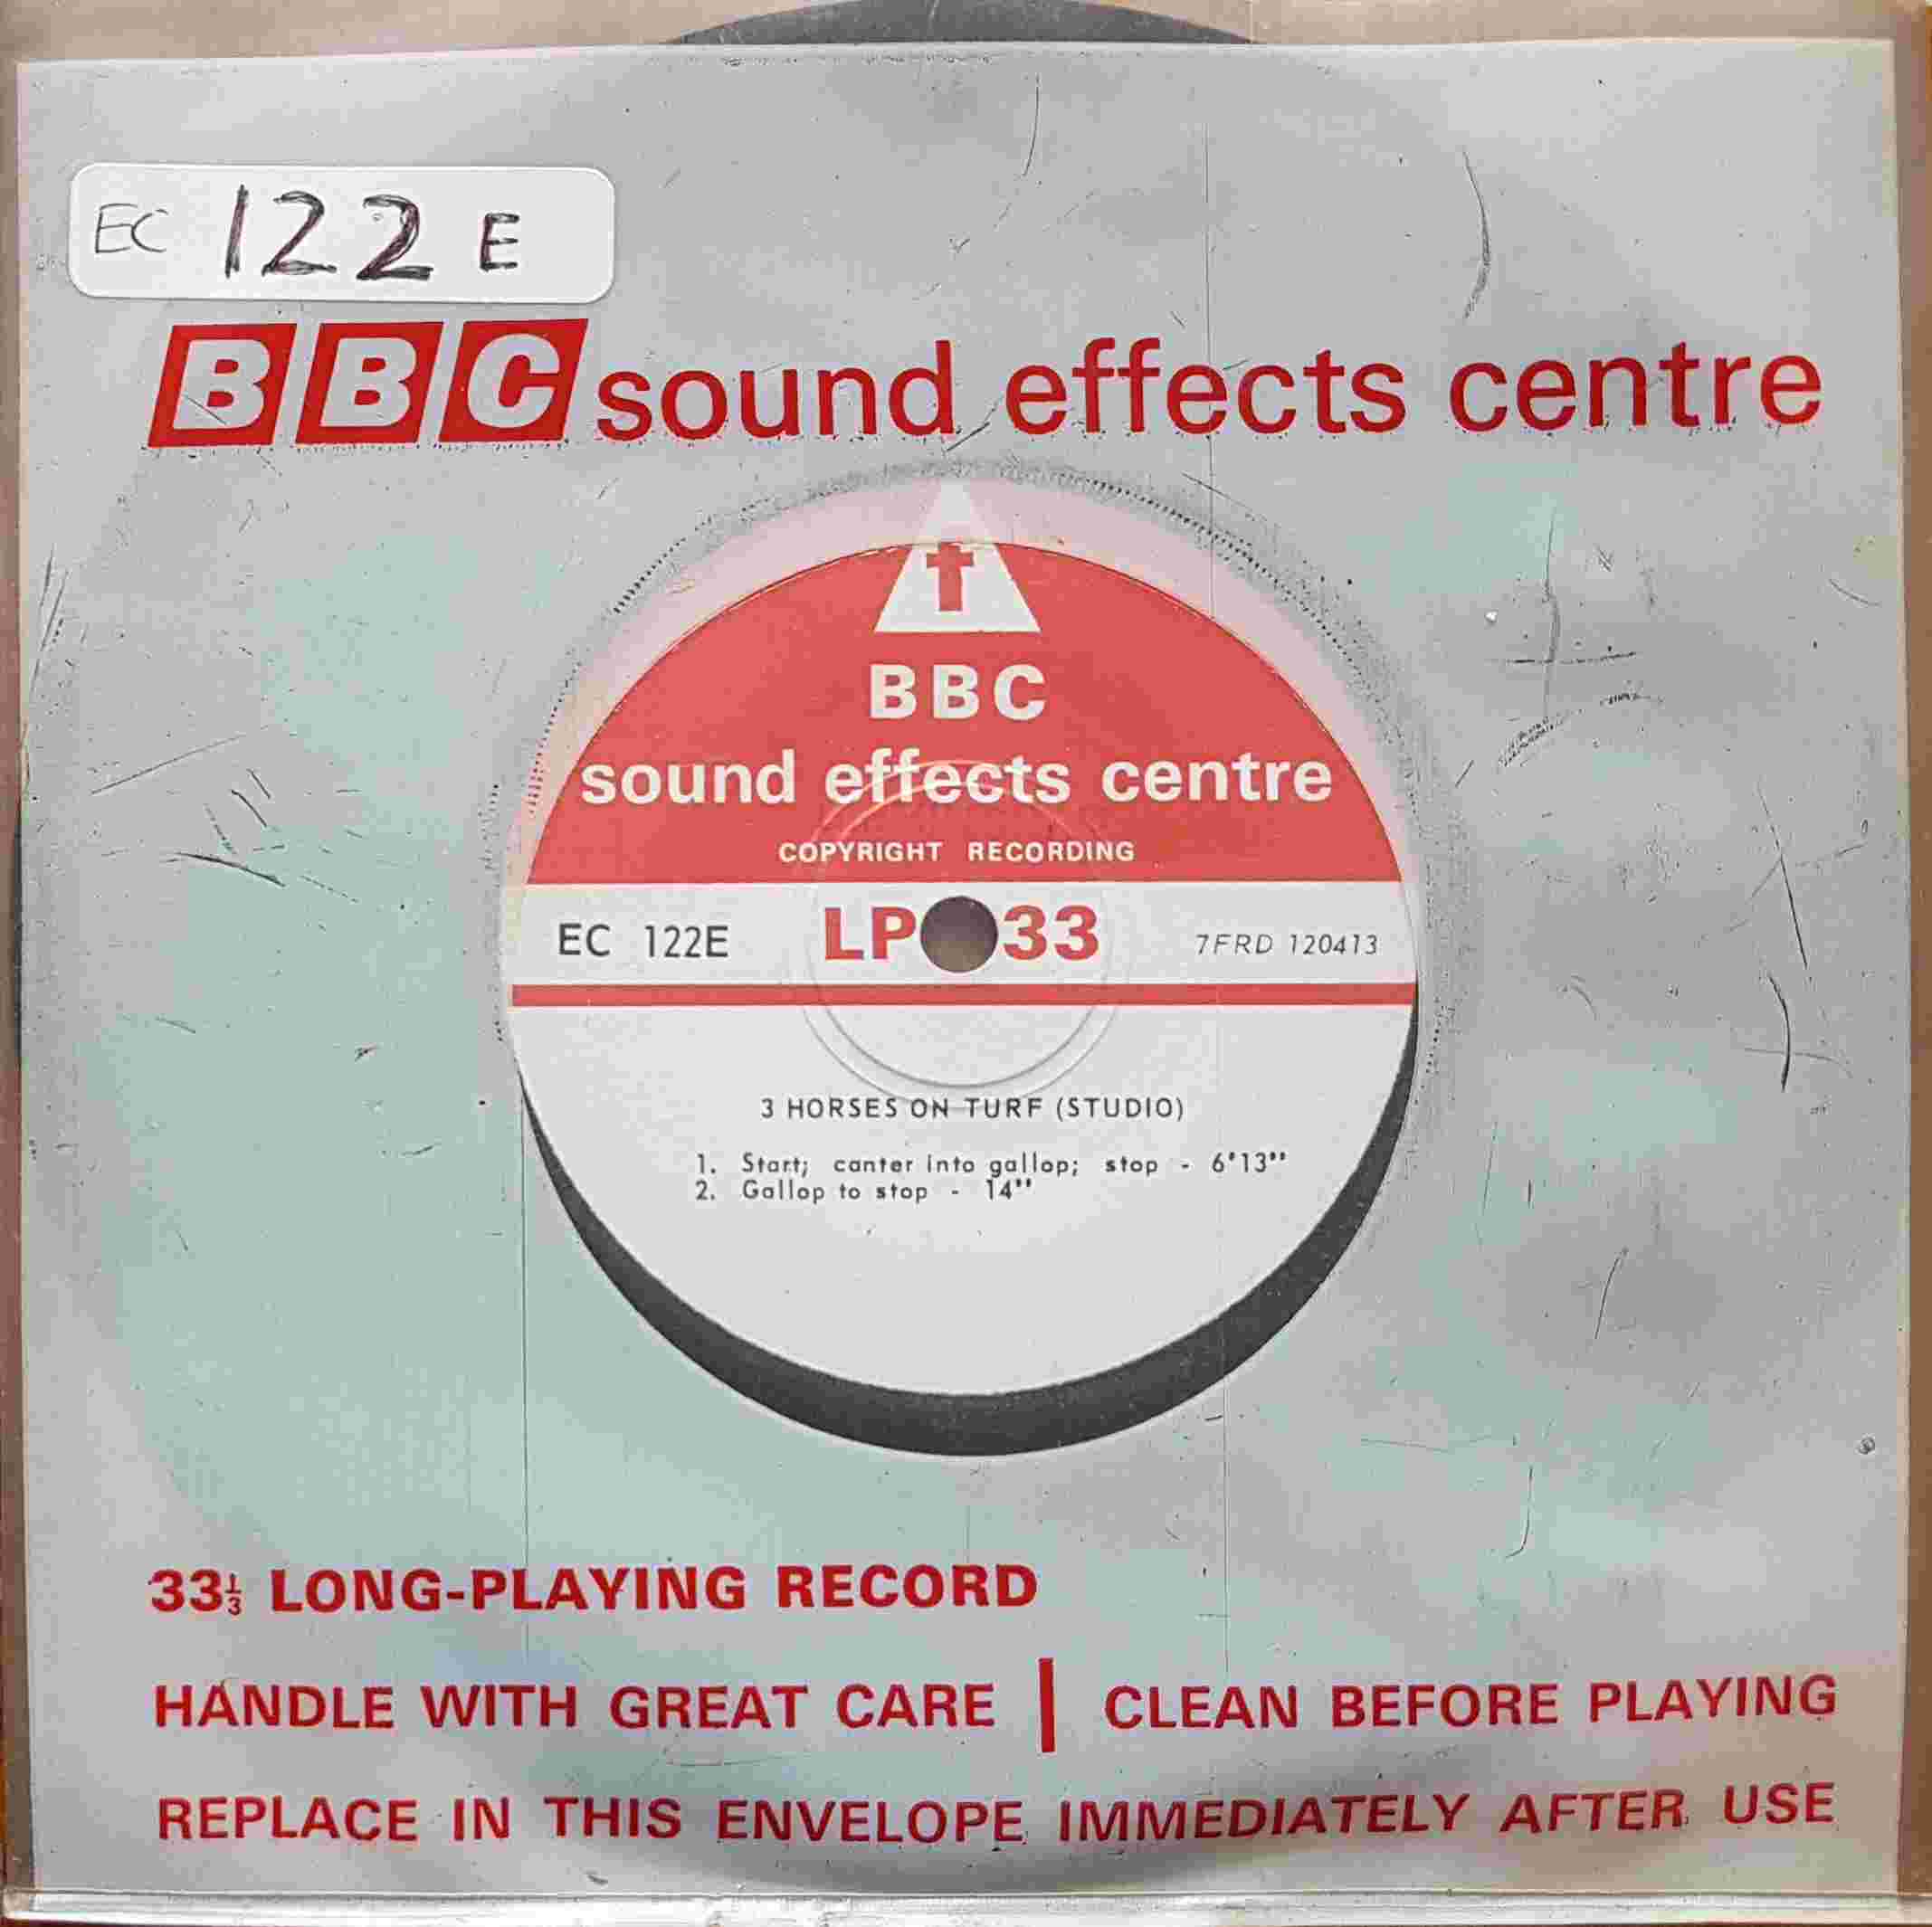 Picture of EC 122E 3 horses on turf (Studio) / 6 horses on turf (Studio) by artist Not registered from the BBC records and Tapes library